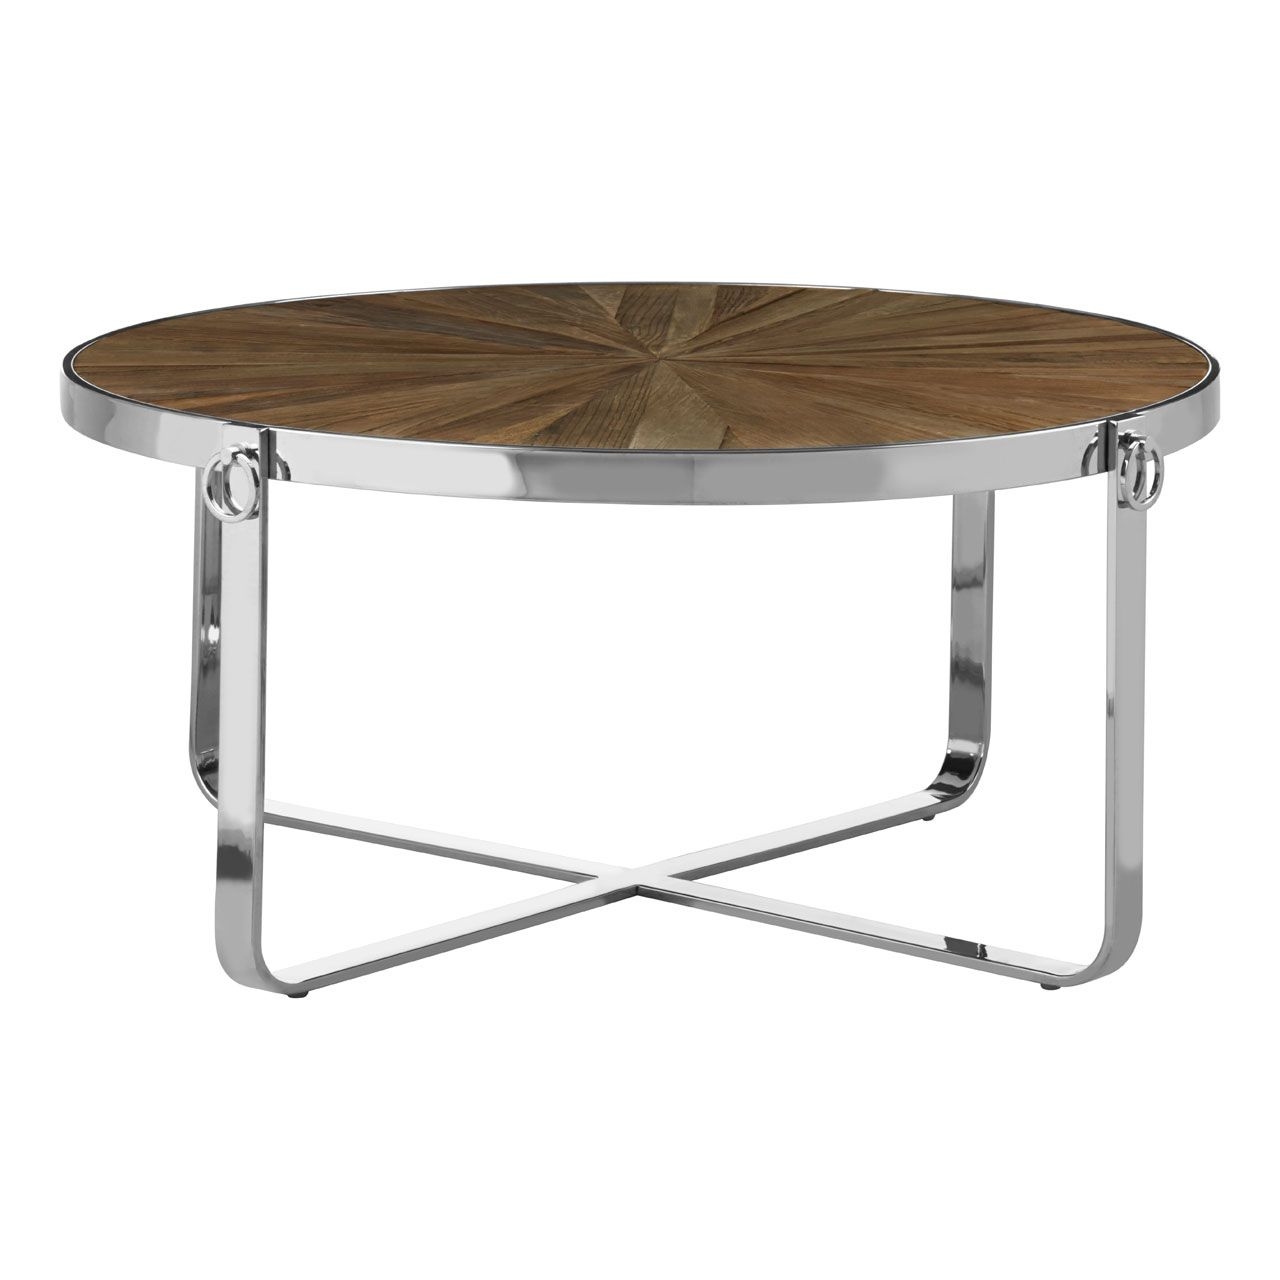 Mitra Wooden Coffee Table In Natural With Stainless Steel Base